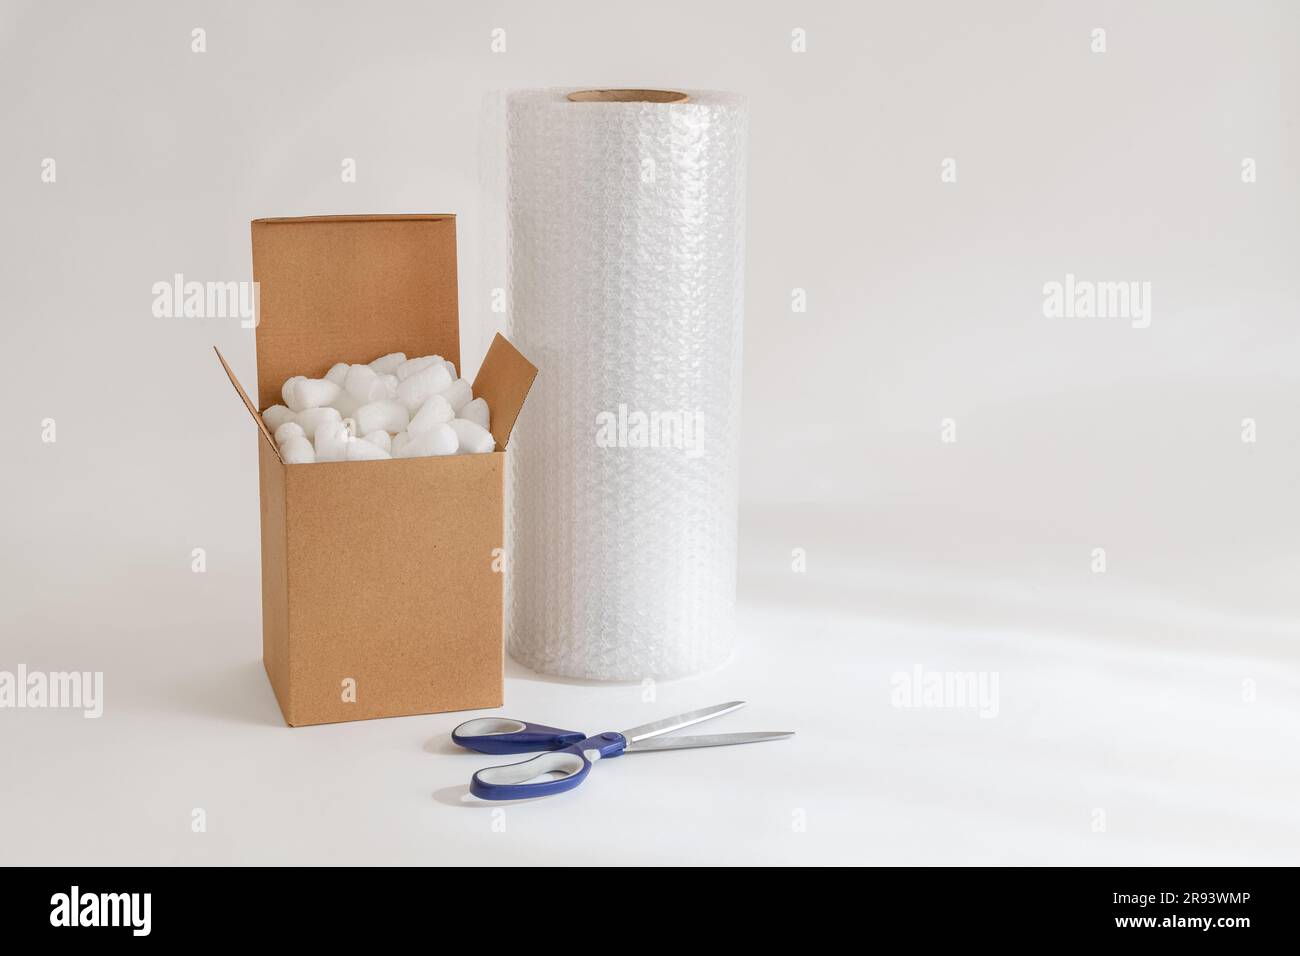 Cardboard box isolated on the white background filled with packing peanuts, bubble wrap and scissors Stock Photo